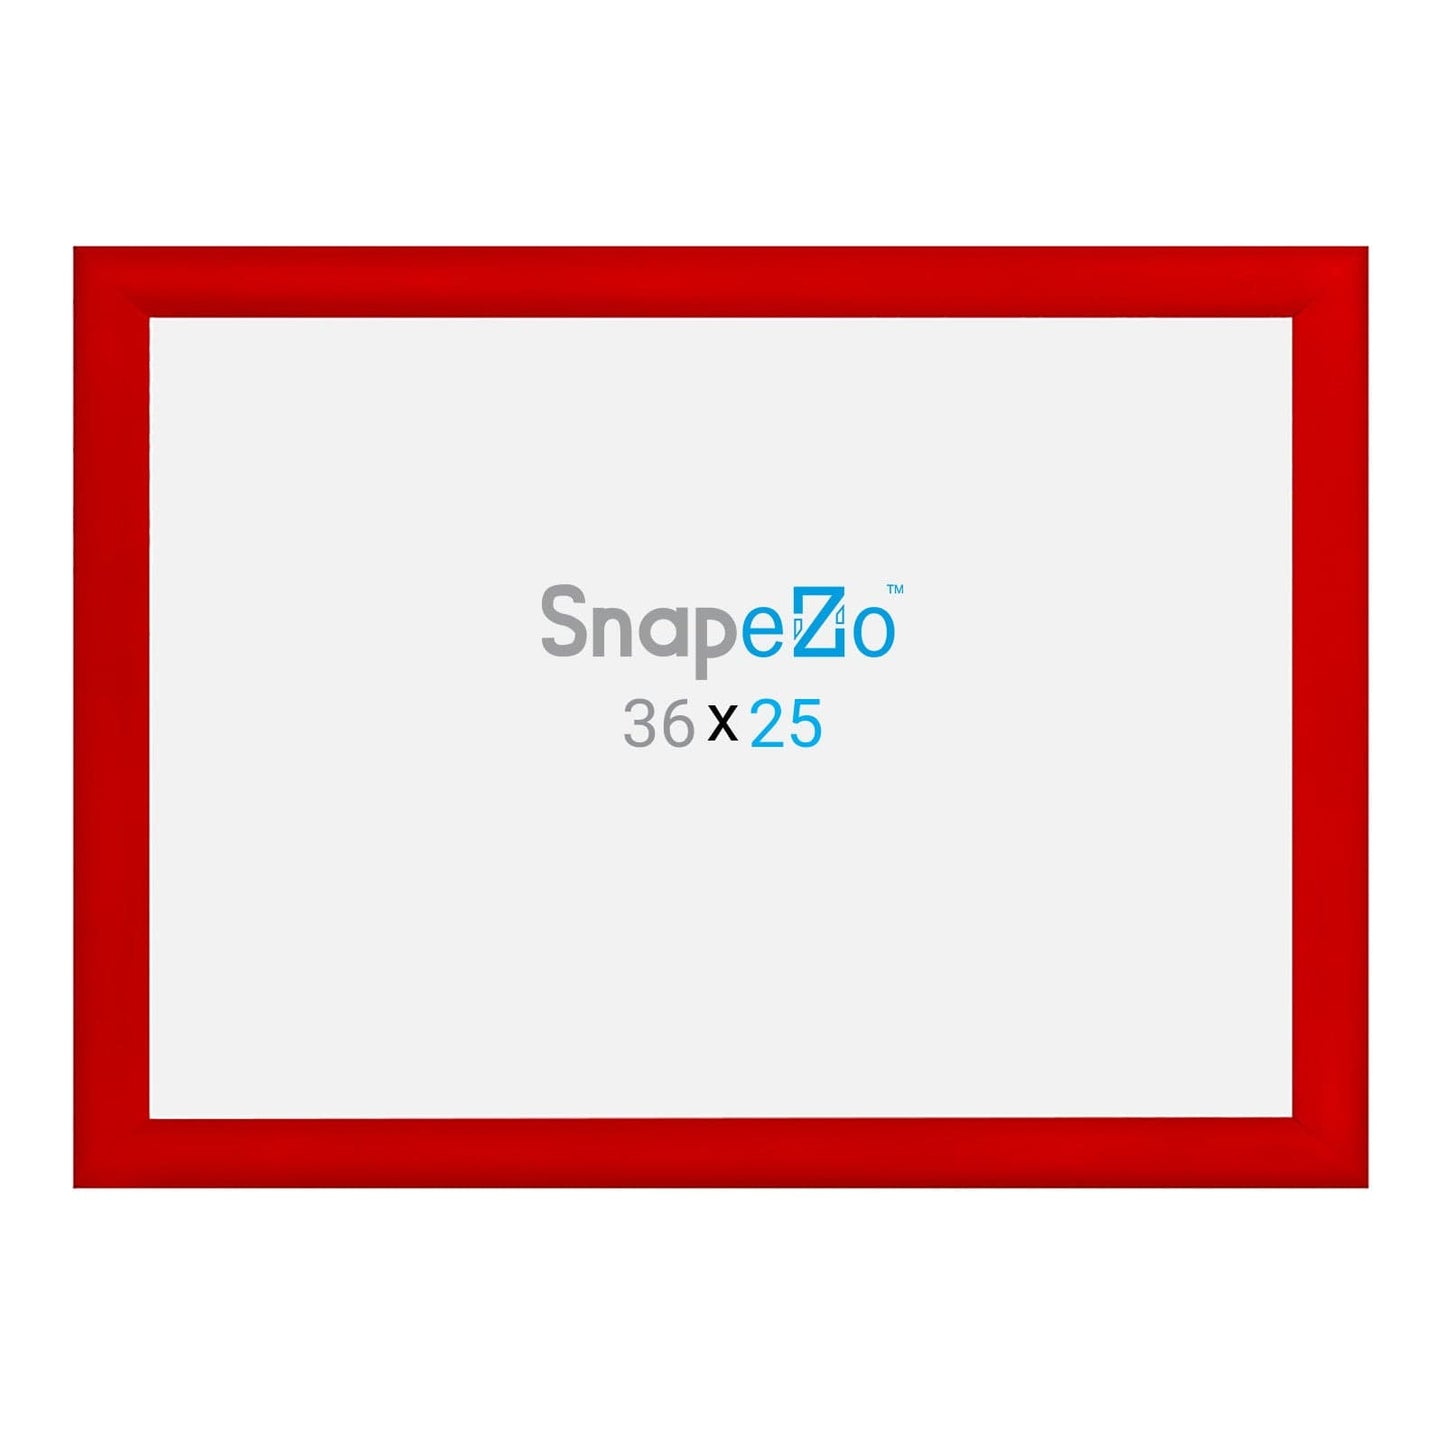 25x36 Red SnapeZo® Snap Frame - 1.2" Profile - Snap Frames Direct